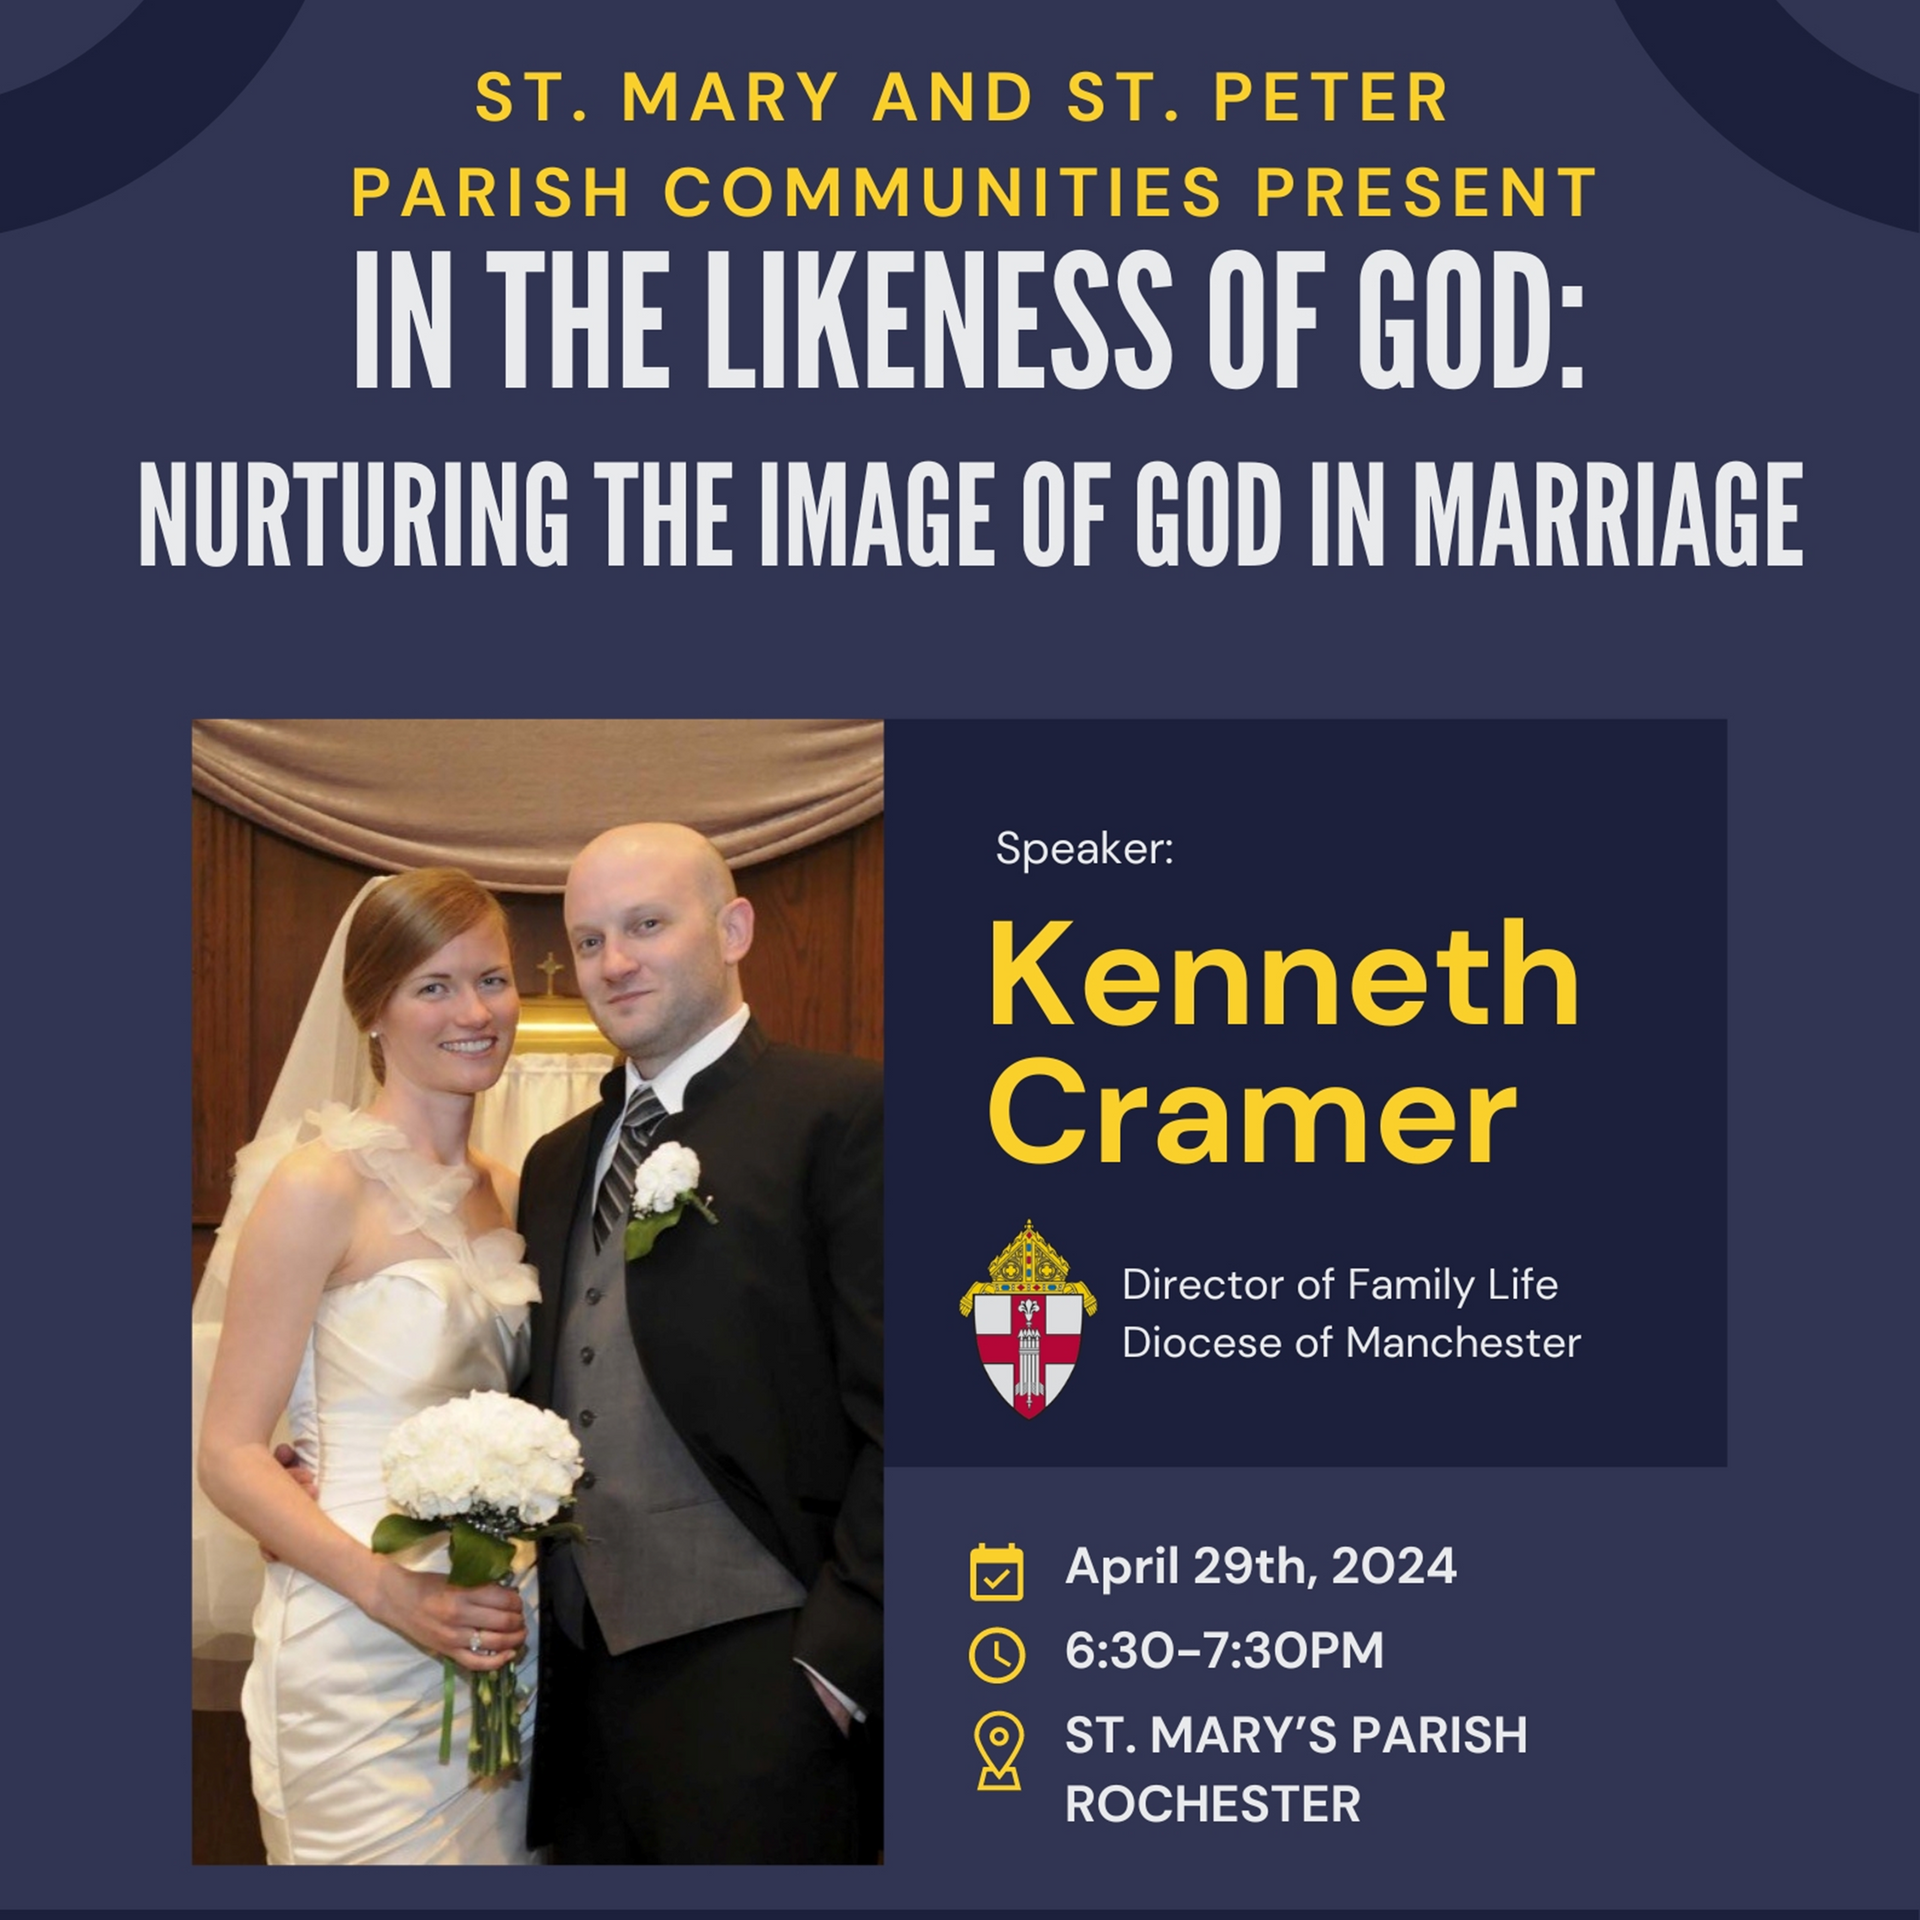 In the Likeness of God: Nurturing the Image of God in Marriage
Presented by Kenneth Cramer
St. Mary Church, Rochester NH
April 29, 2024 at 6:30pm